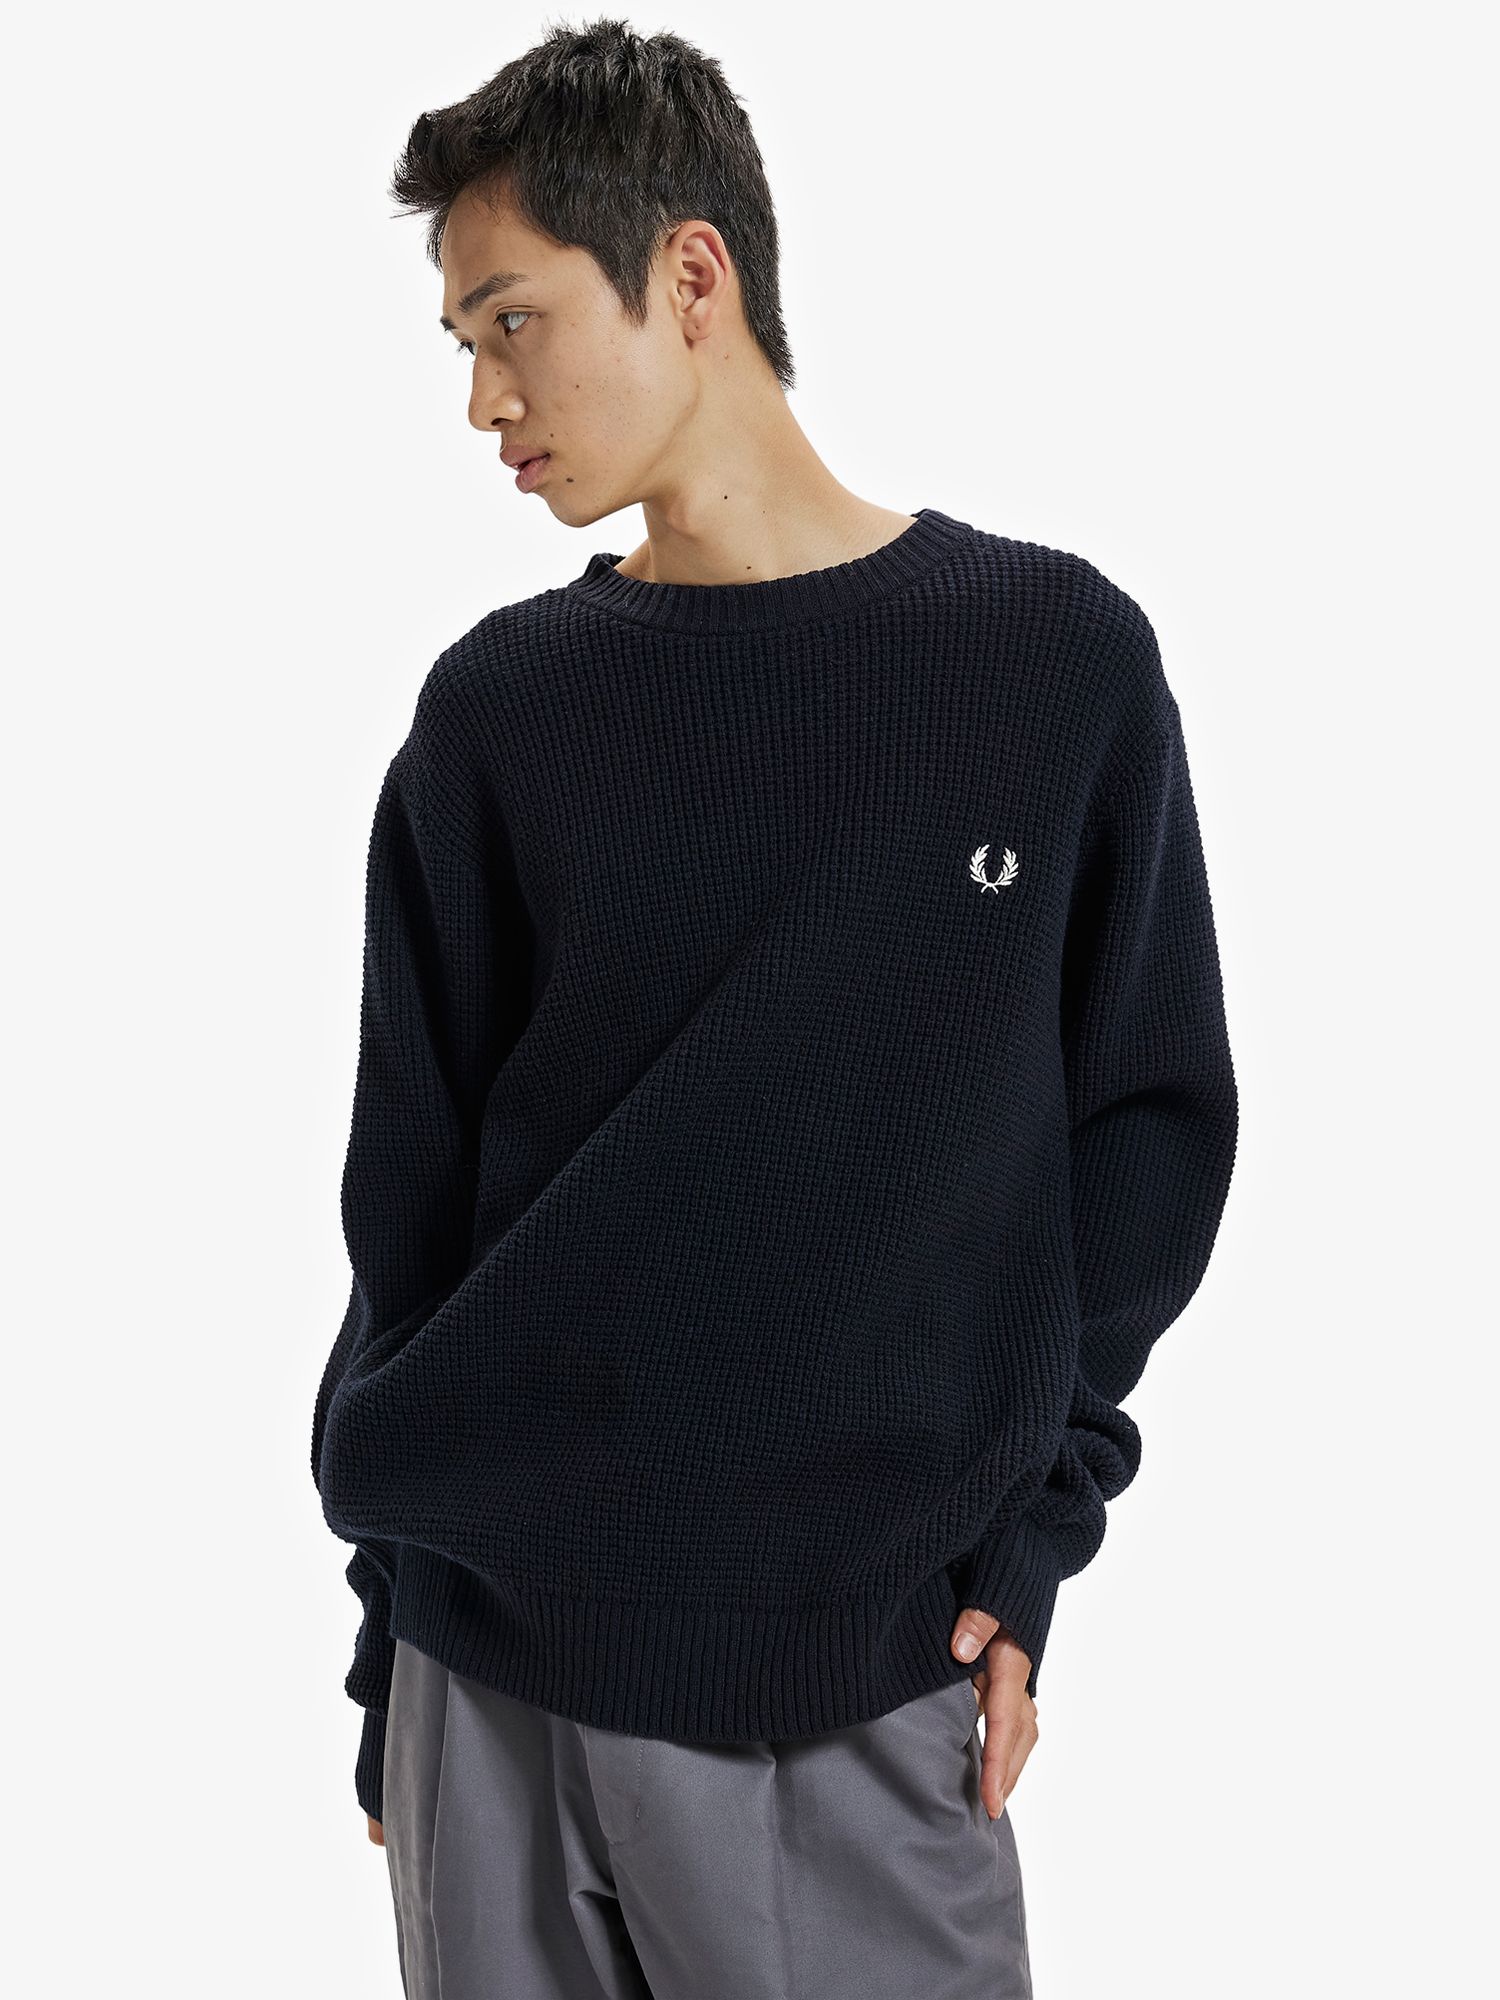 Fred Perry Textured Lambswool Knit Jumper, Navy, S